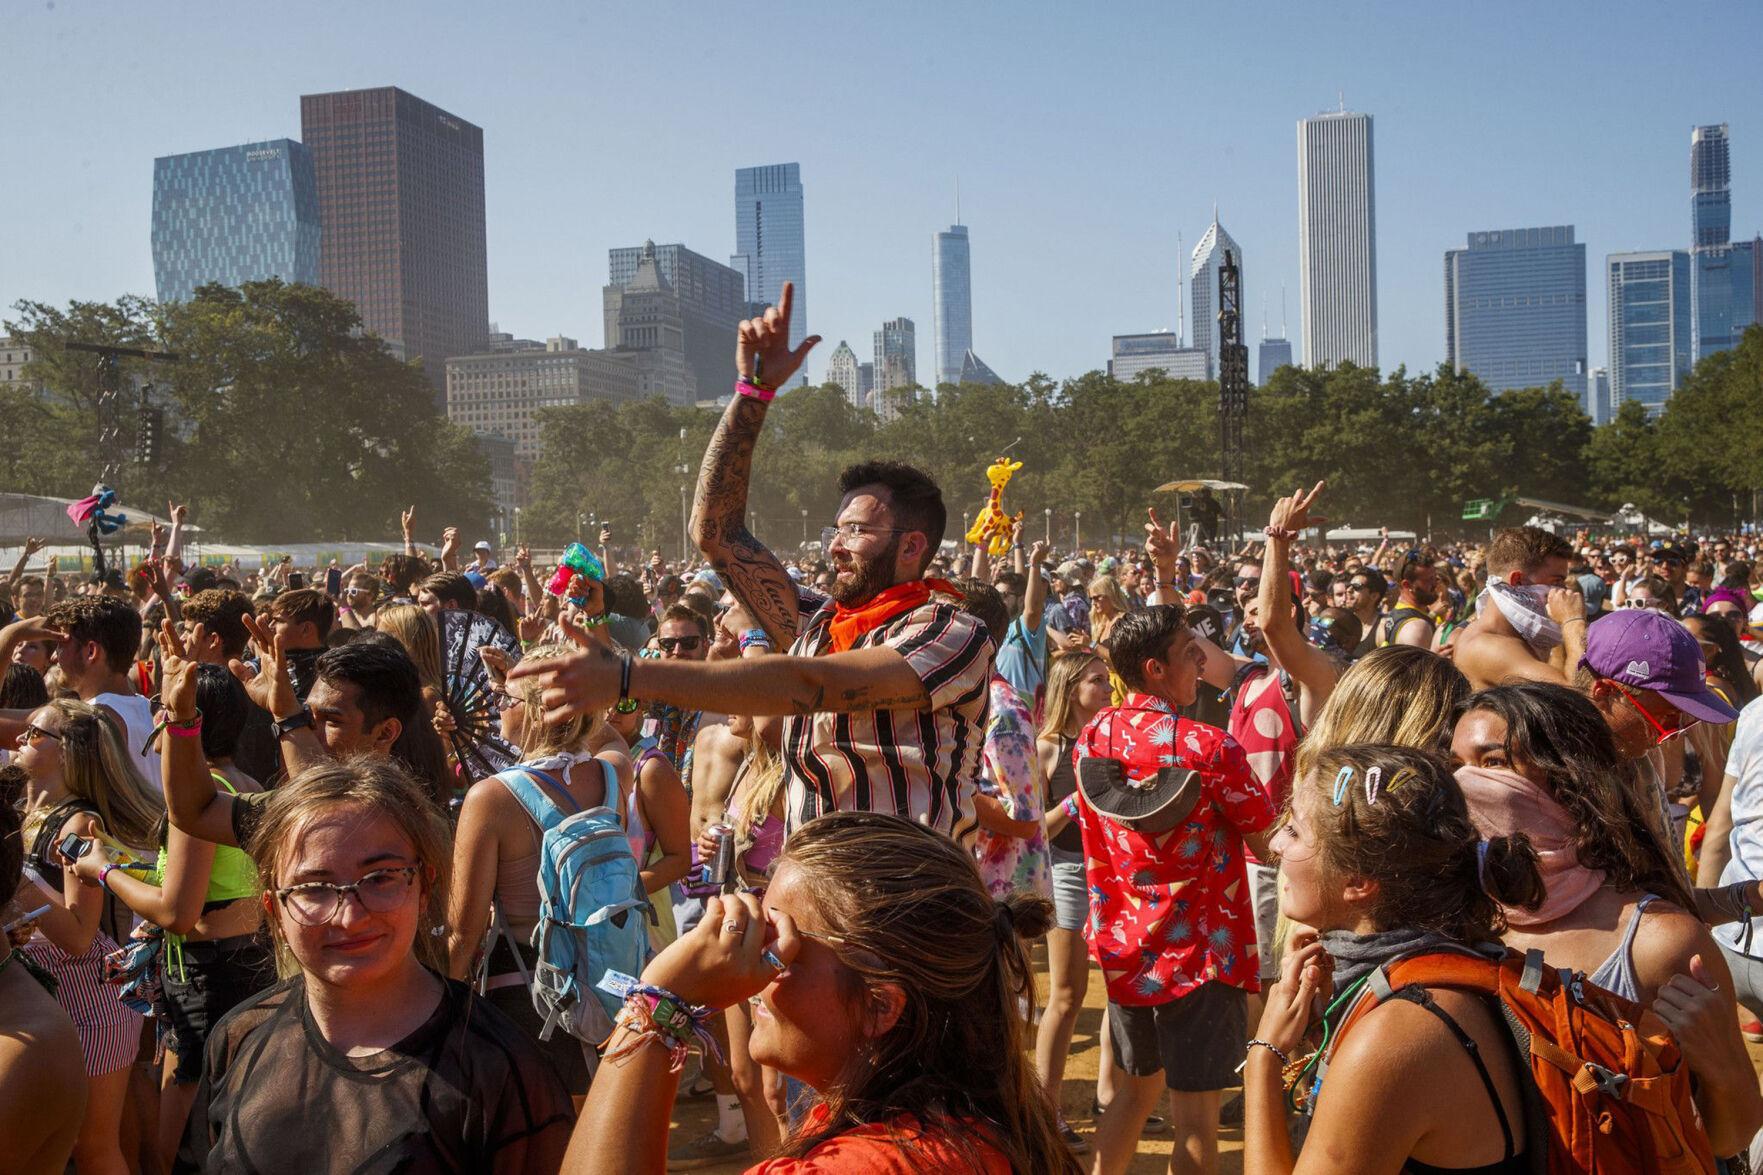 Your Guide to the Lollapalooza Music Festival in Chicago